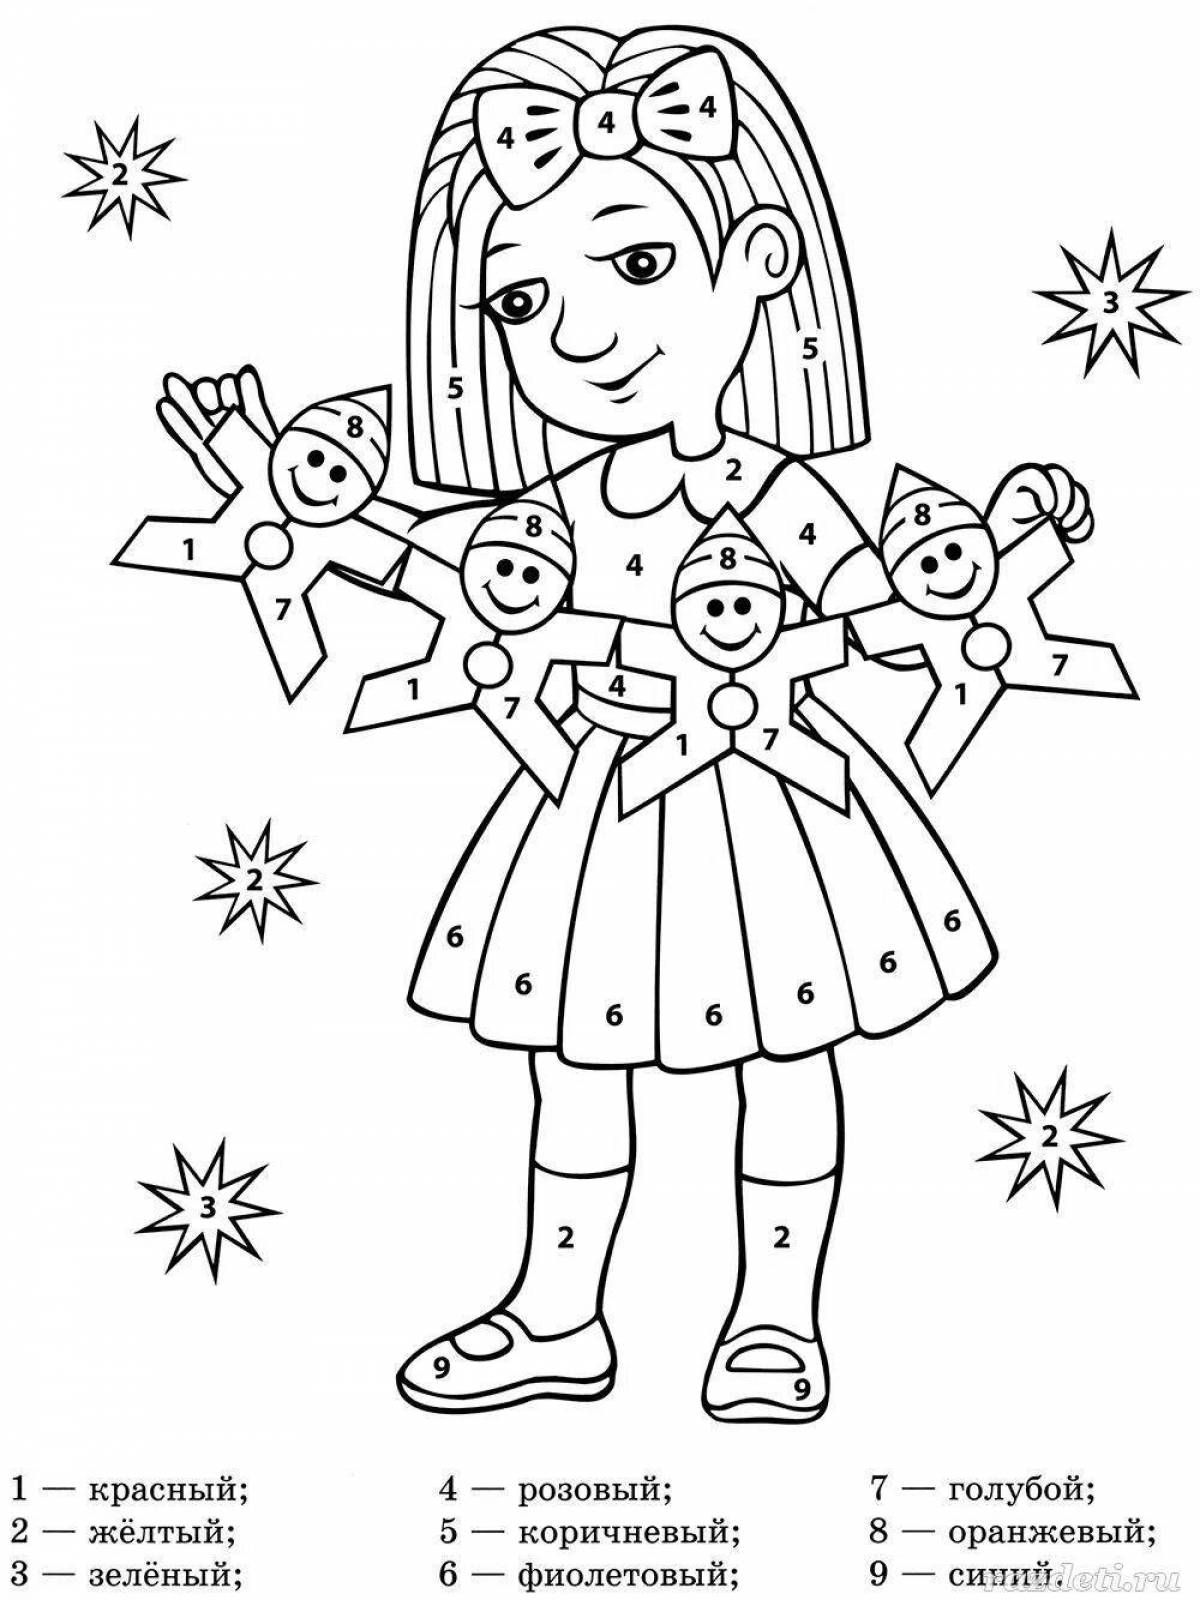 Sweet coloring doll for 6-7 year olds